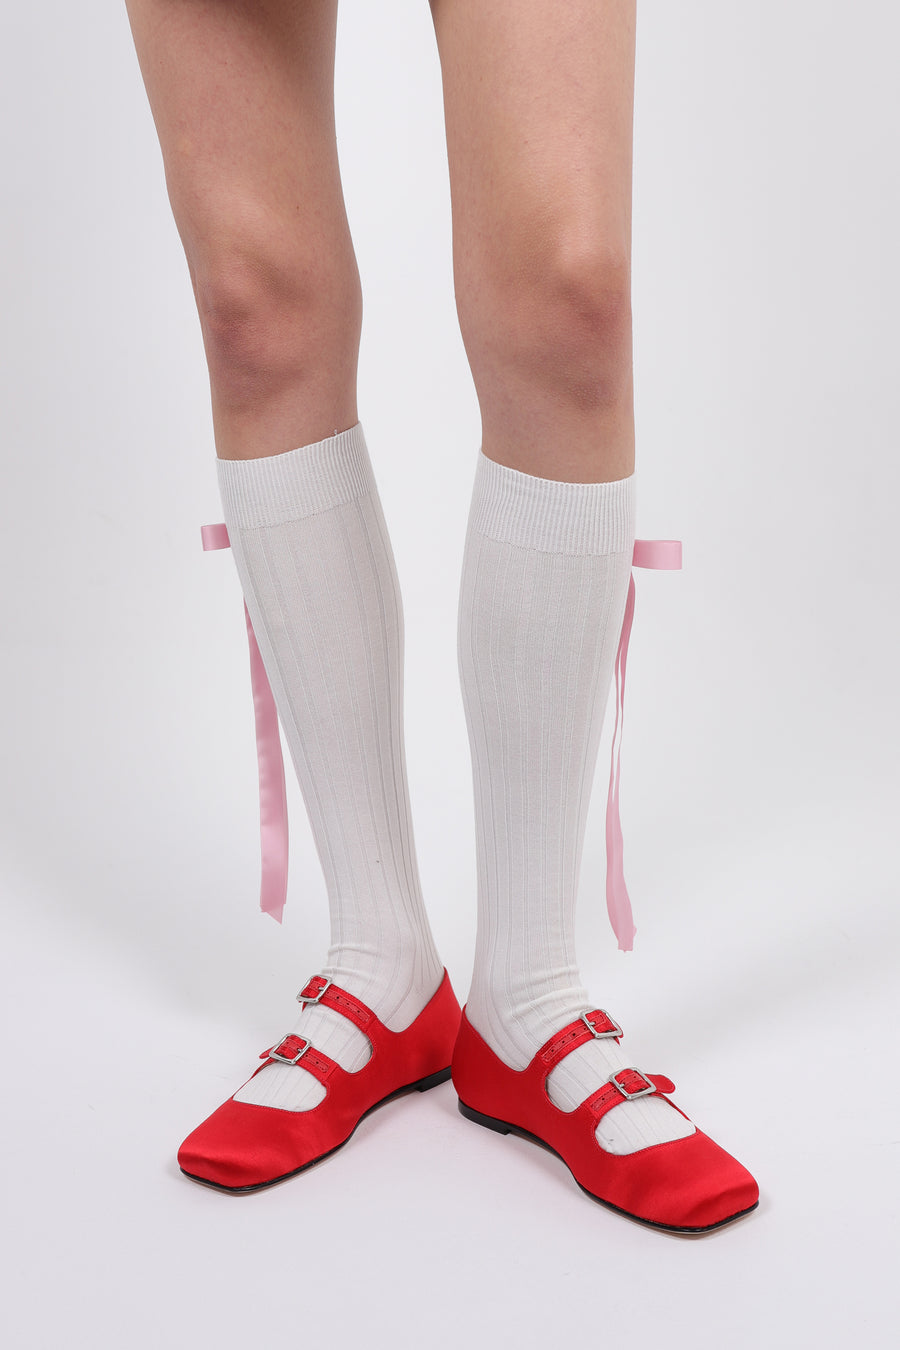 Cotton blend knee high socks in off white with pink long satin bows at side on model